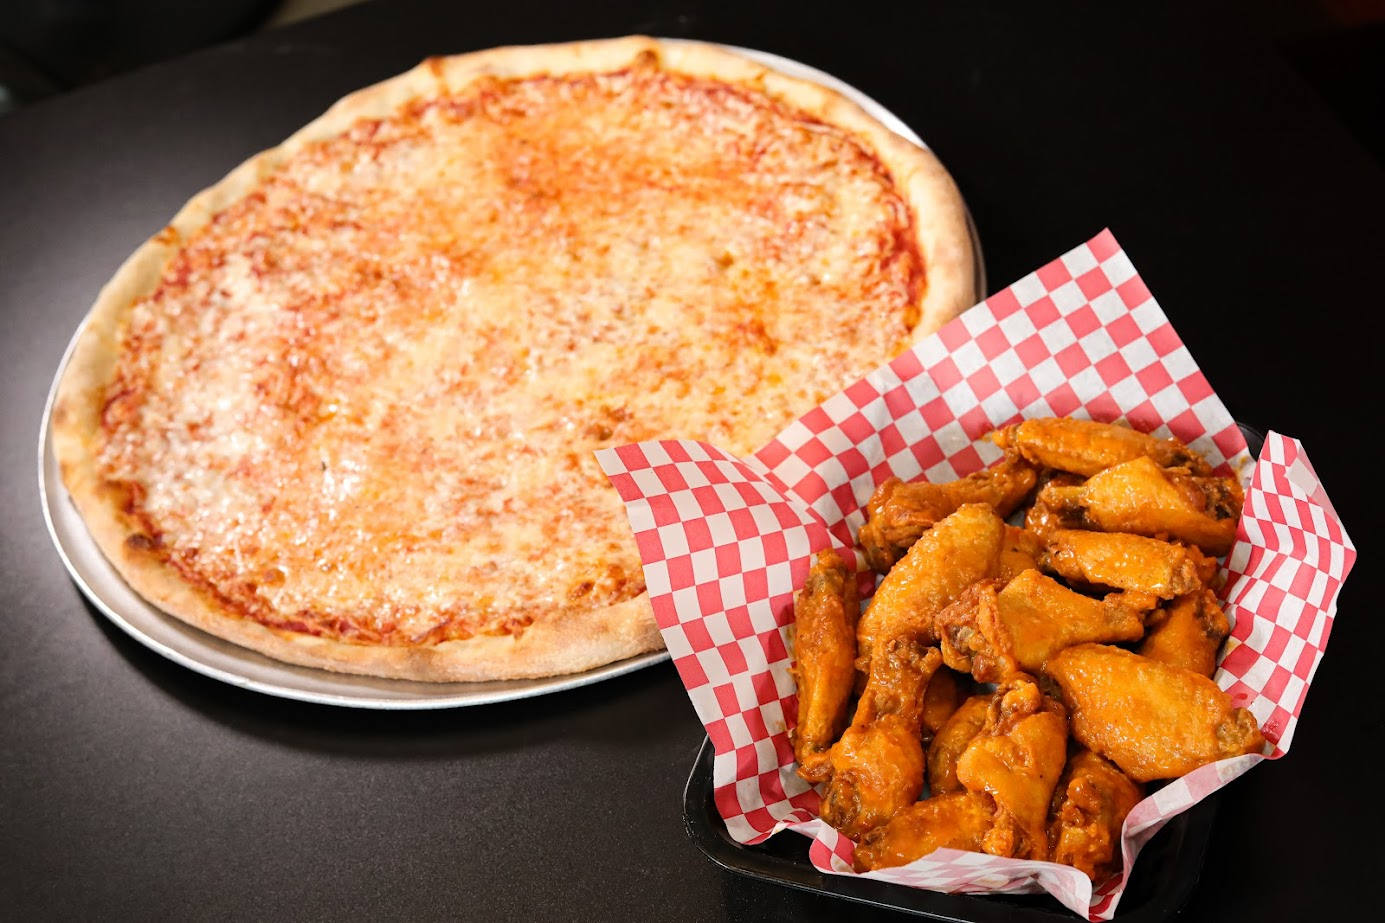 pizza and wings arranged on a table.